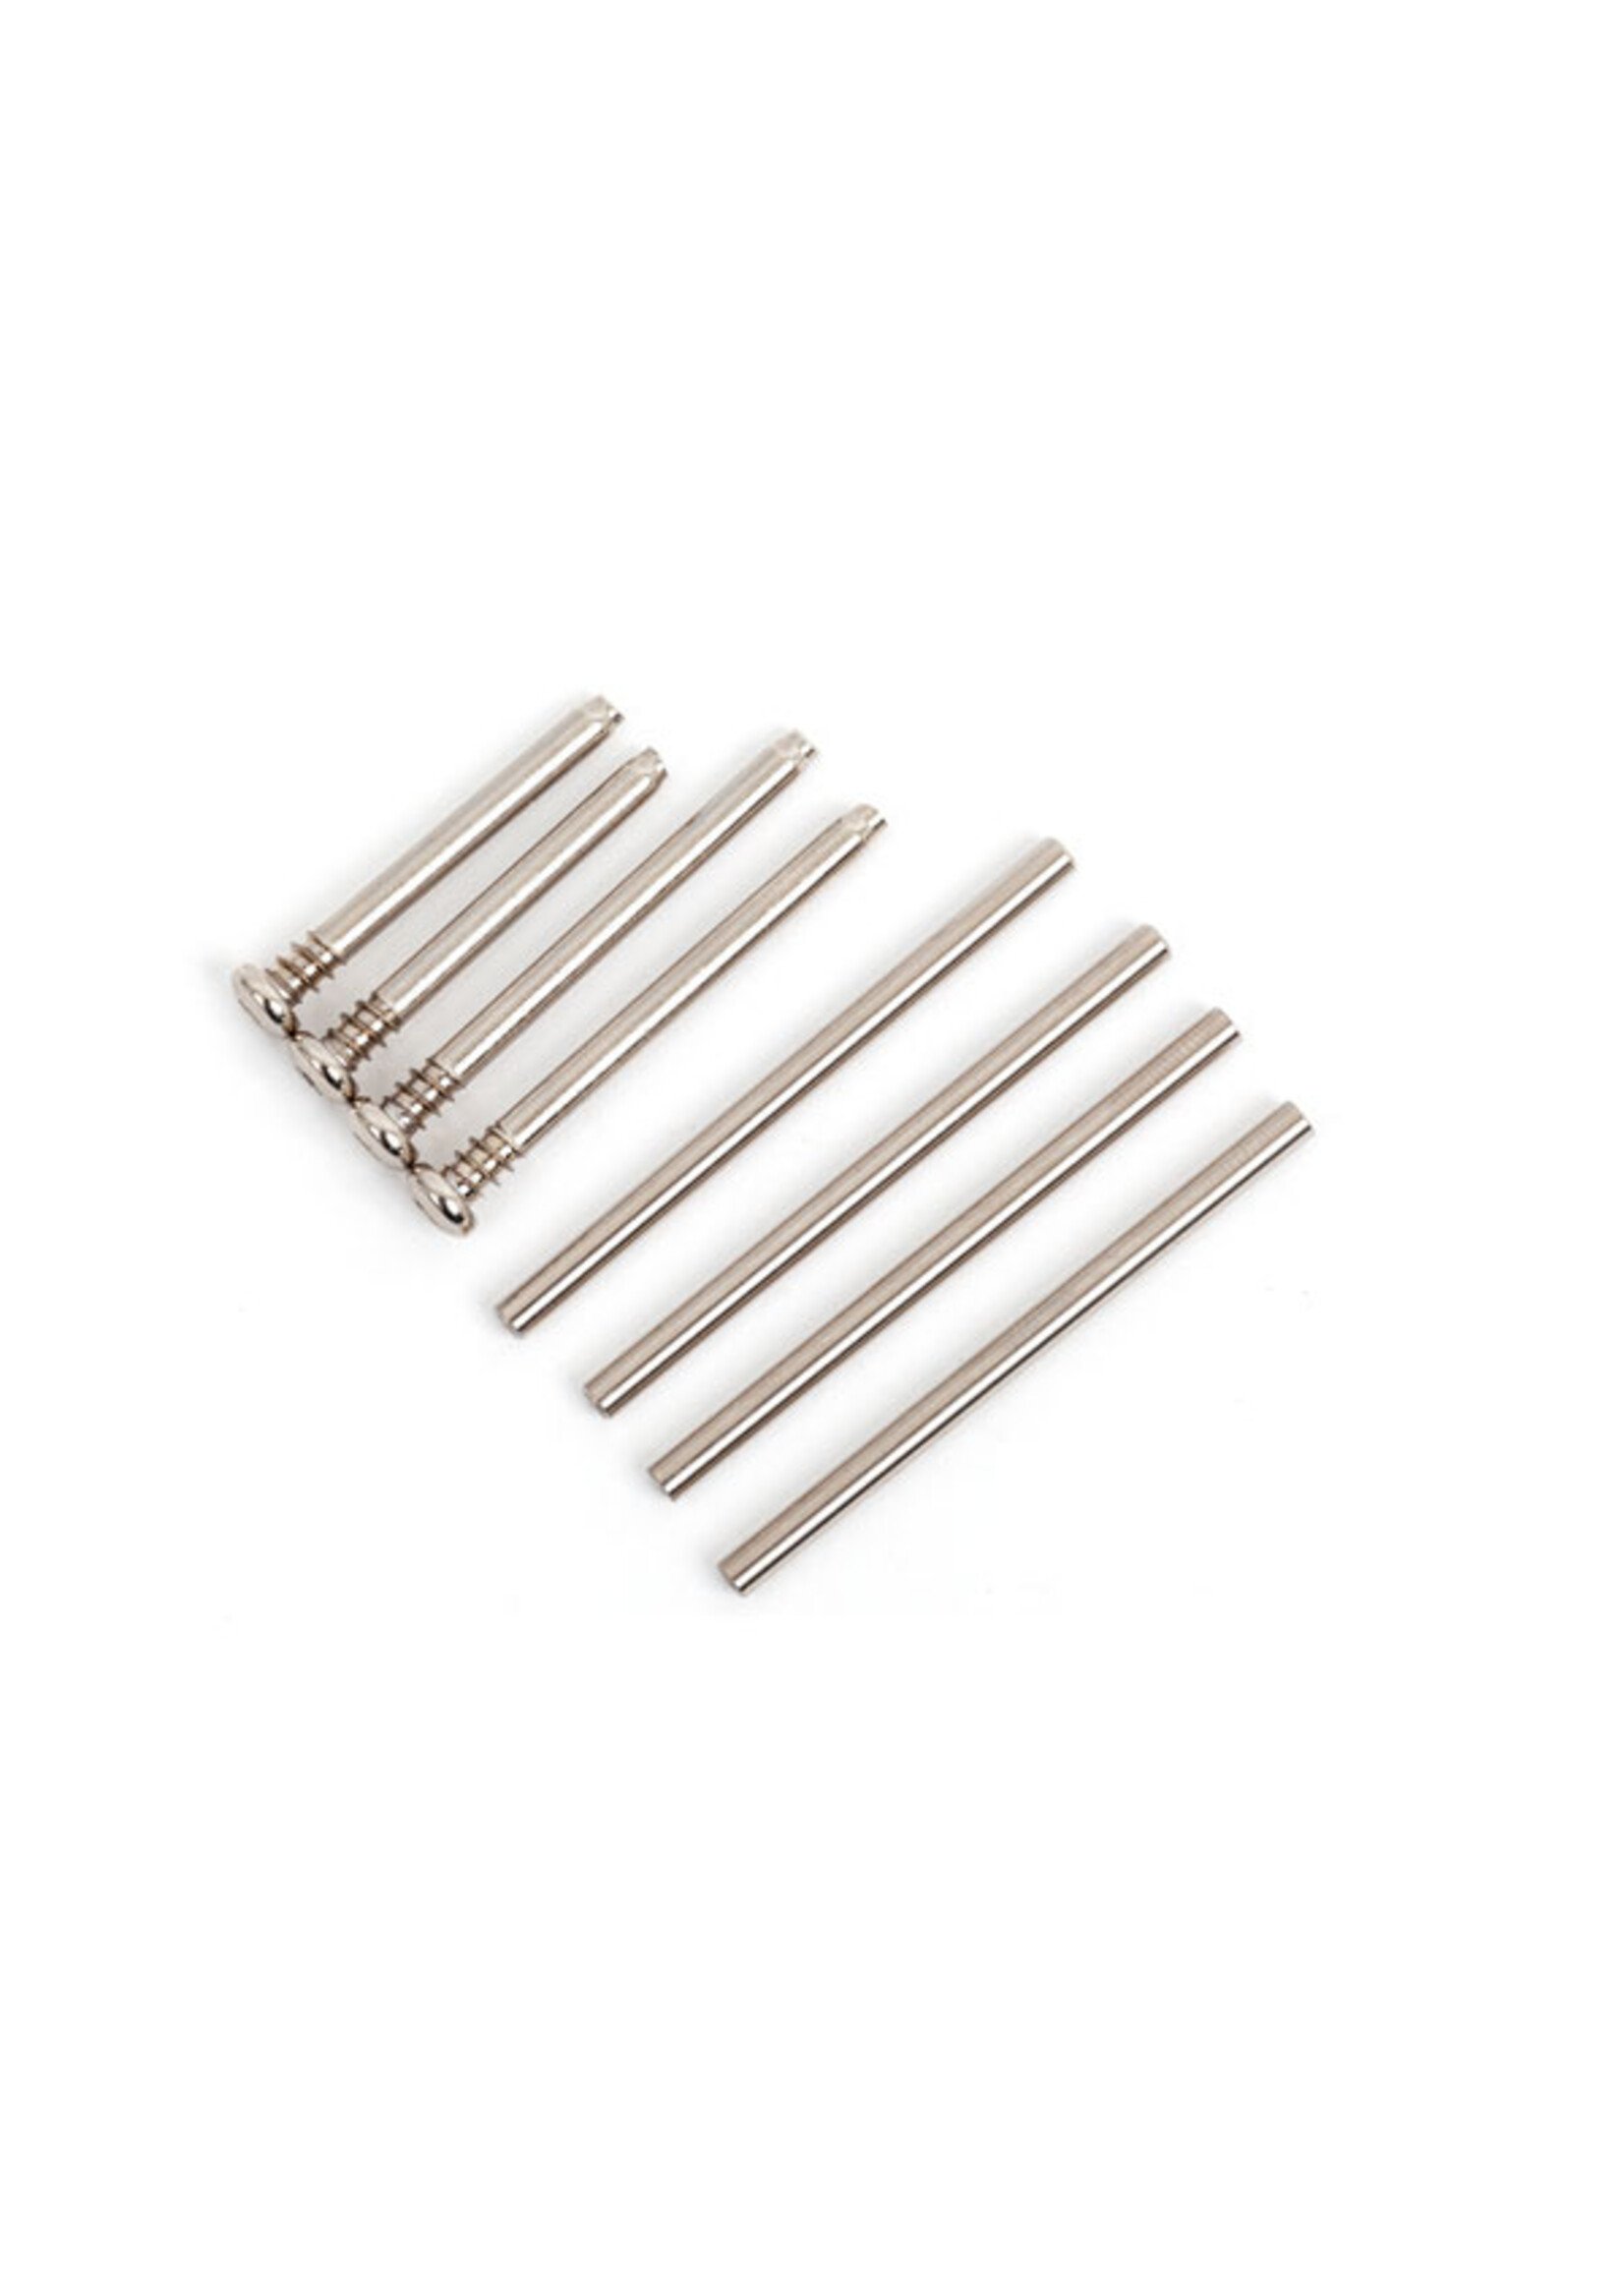 Traxxas 9042 - Complete Suspension Pin Set, Front & Rear